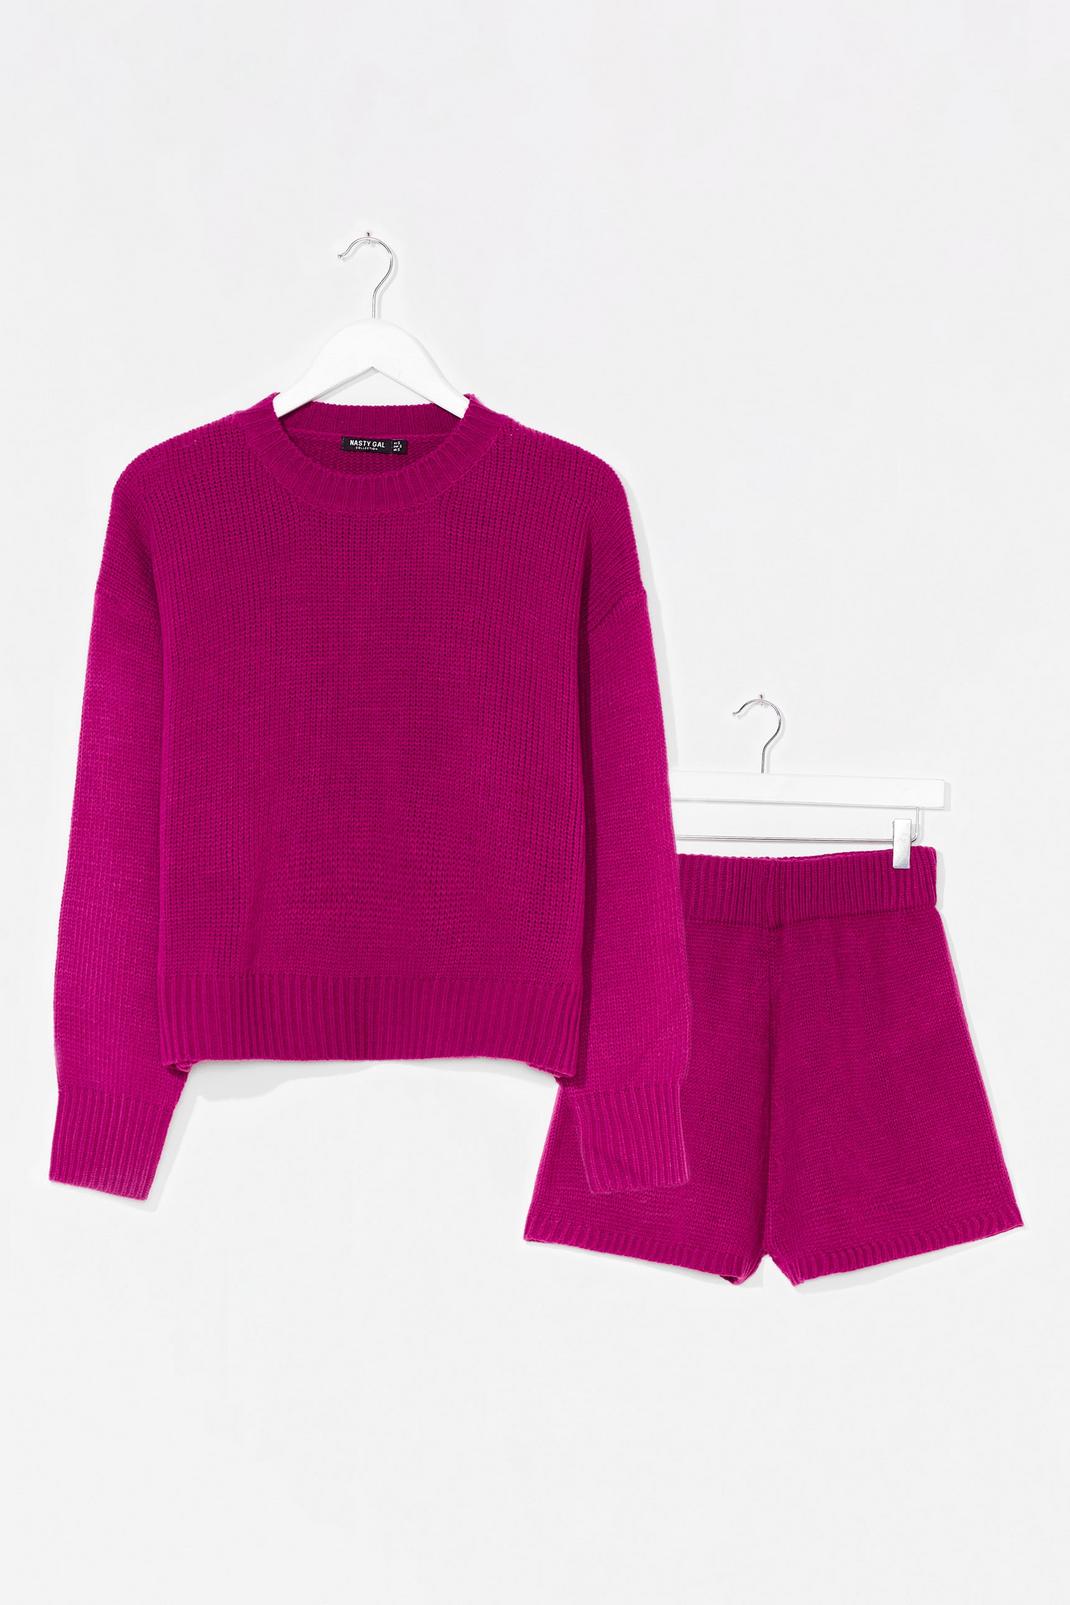 Violet Luxe Like Fun Knitted Sweater and Shorts Lounge Set image number 1